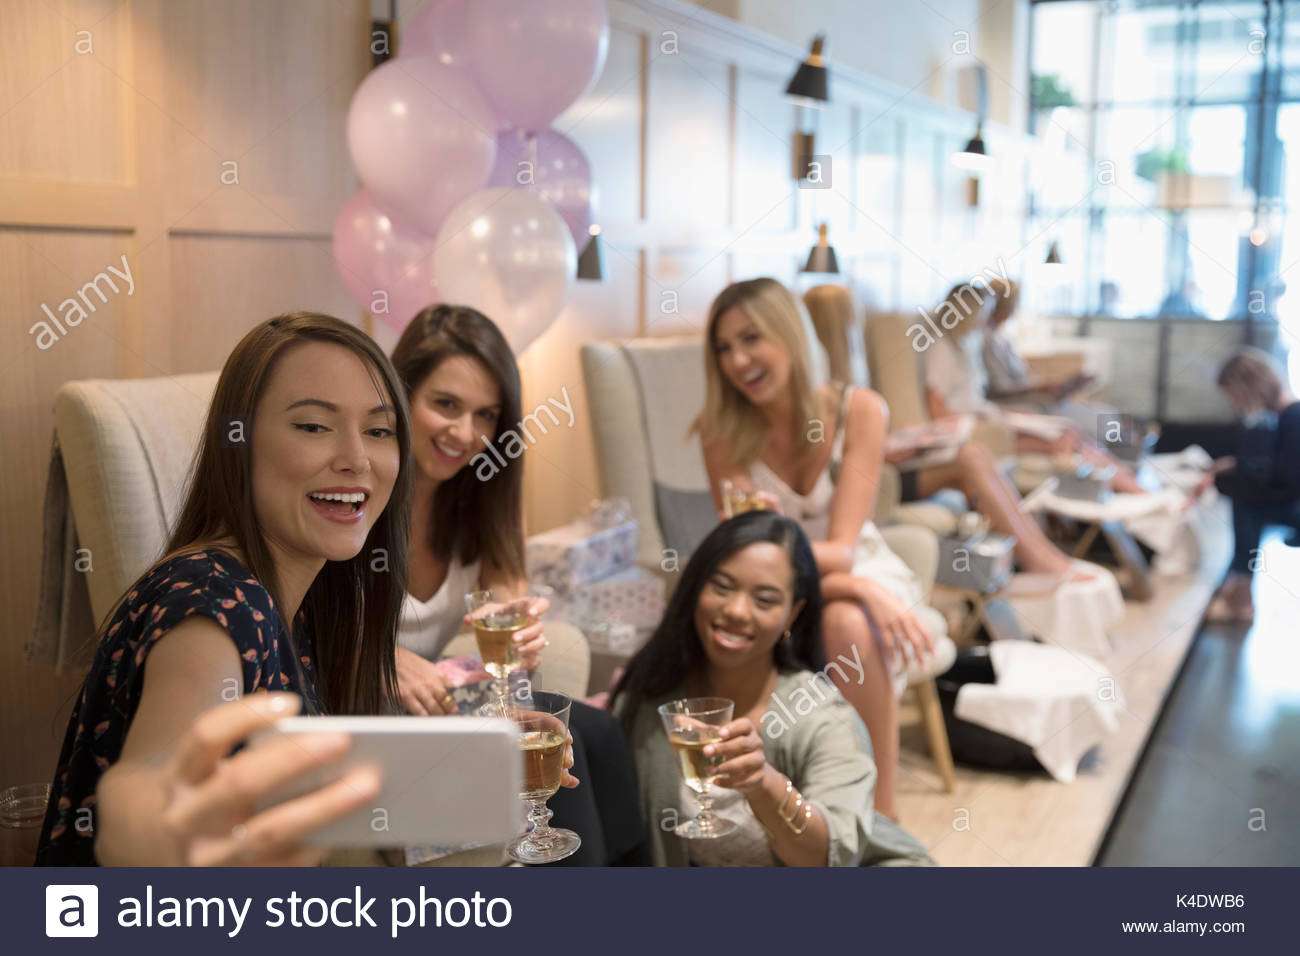 Smiling bridesmaid friends and bride-to-be taking selfie in nail salon Stock Photo